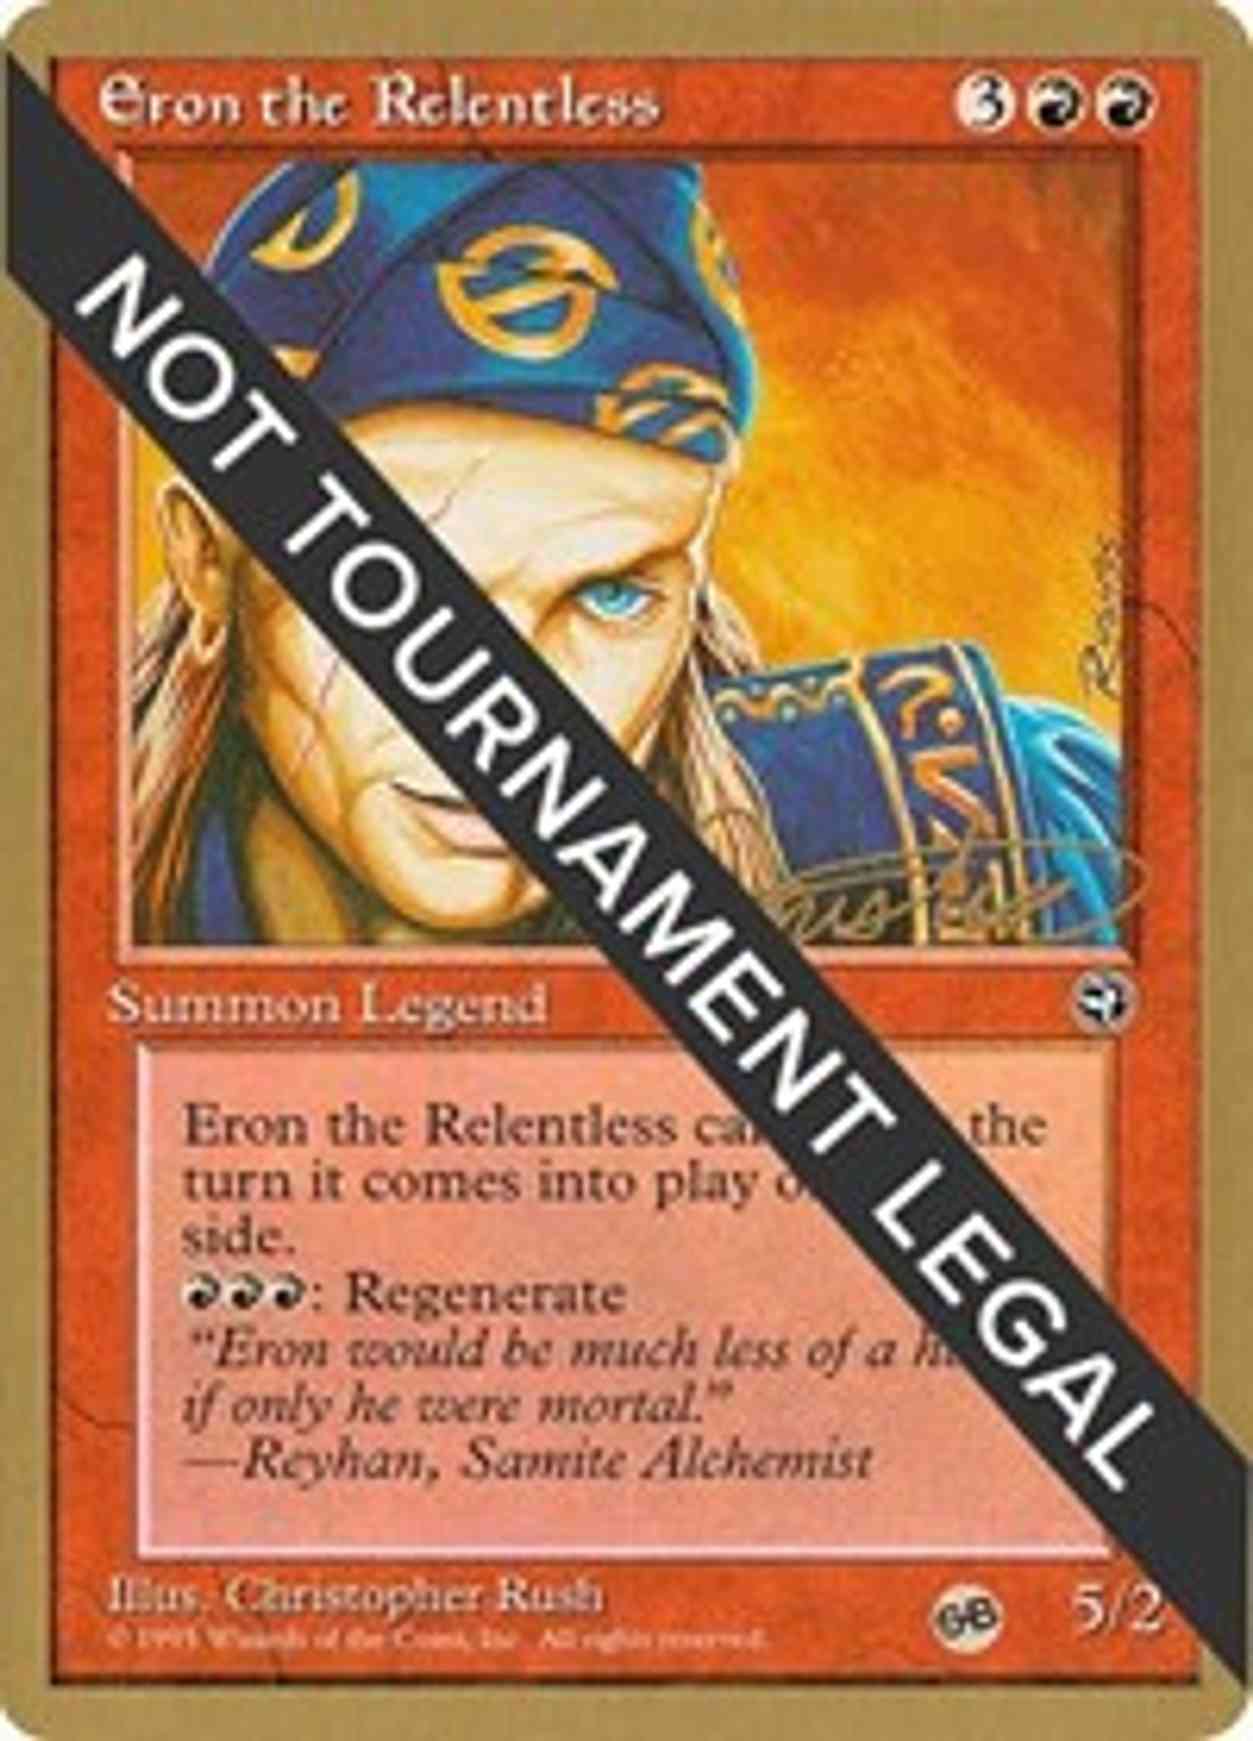 Eron the Relentless - 1996 Mark Justice (HML) (SB) magic card front